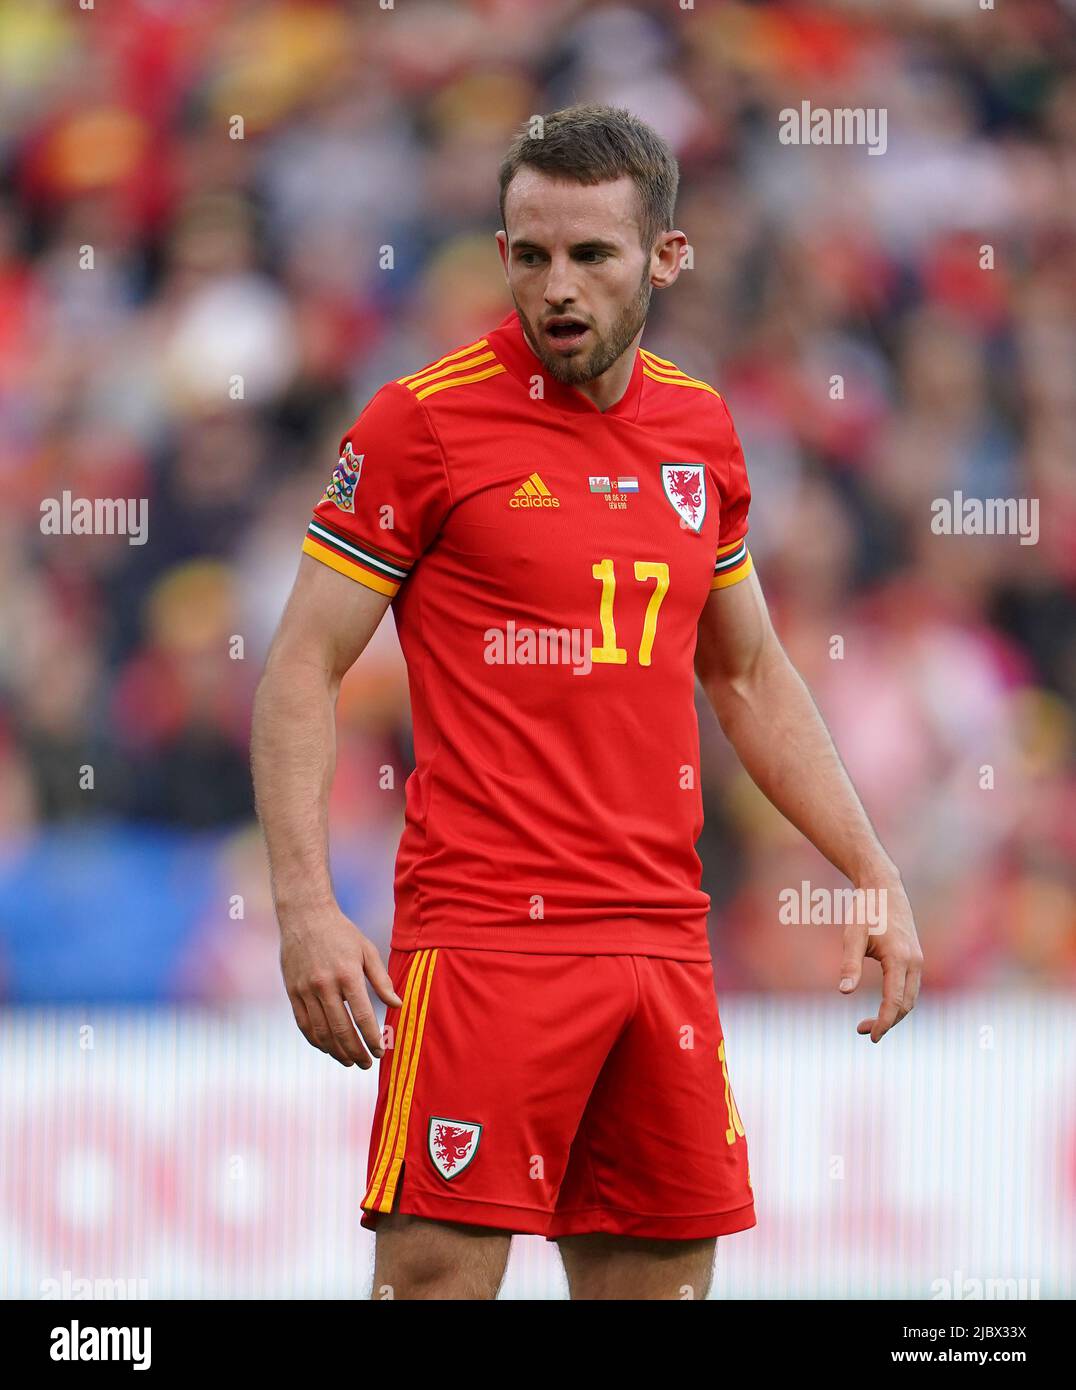 Wales' Rhys Norrington-Davies during the UEFA Nations League match at ...